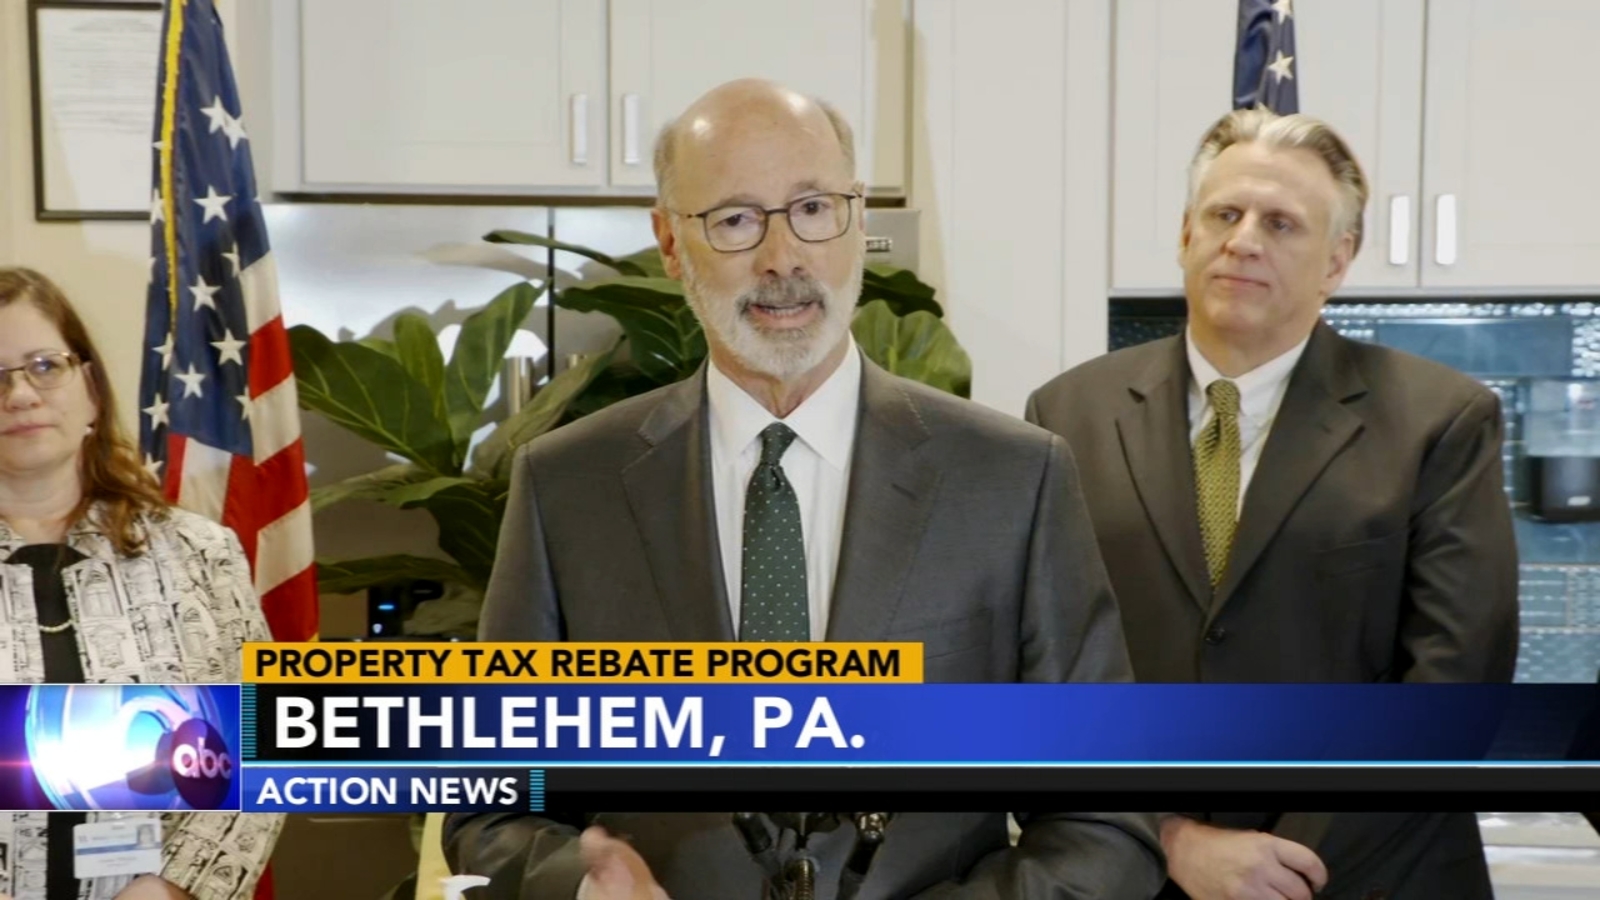 Gov. Tom Wolf calls for 4M to help older Pa. residents with disabilities cover home expenses